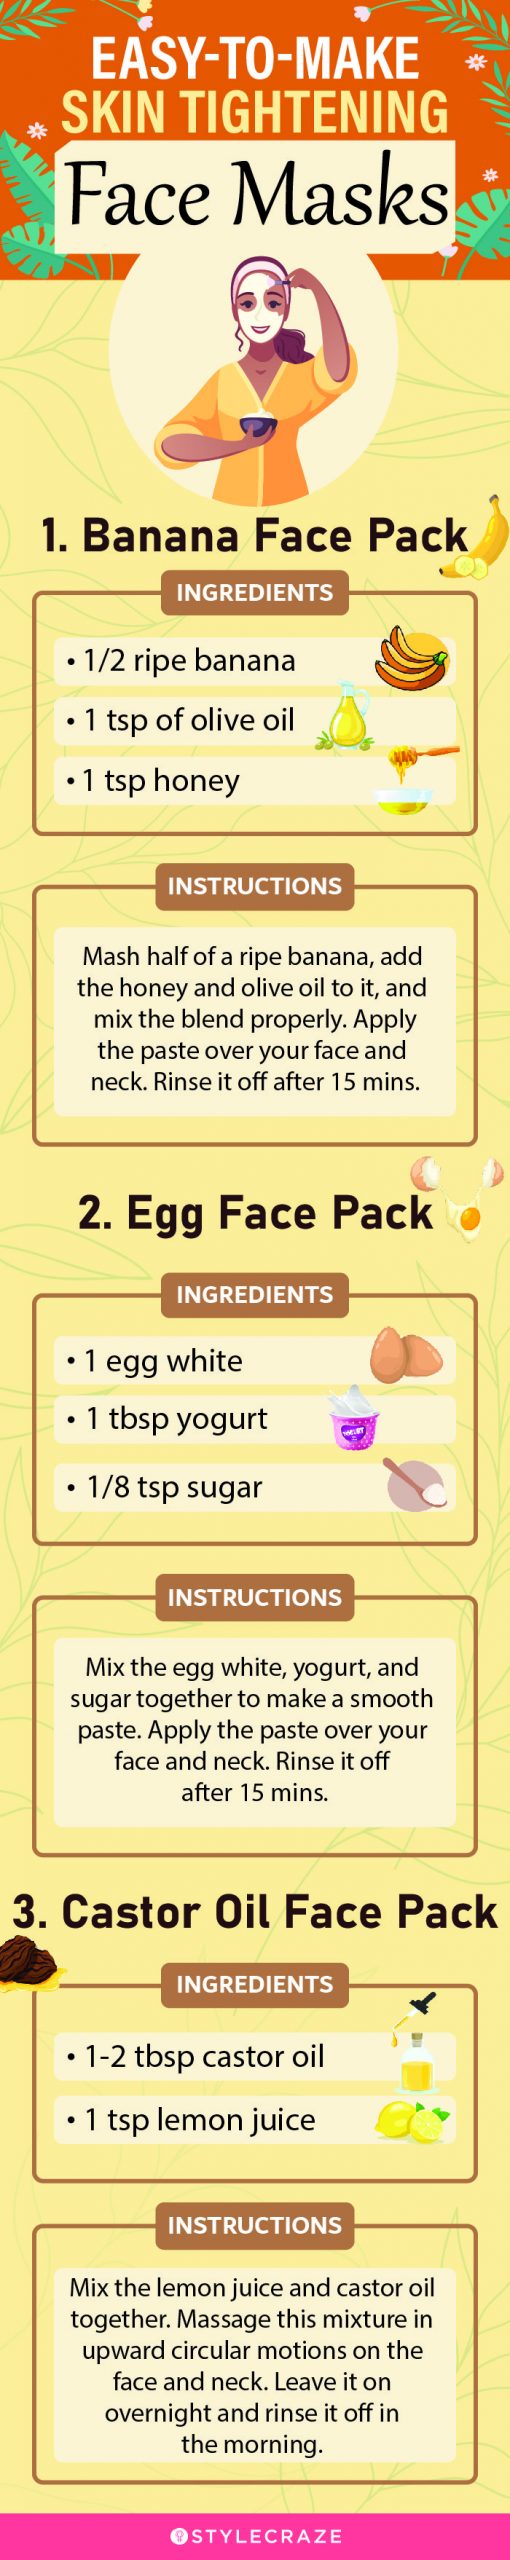 easy to make skin tightening face masks [infographic]